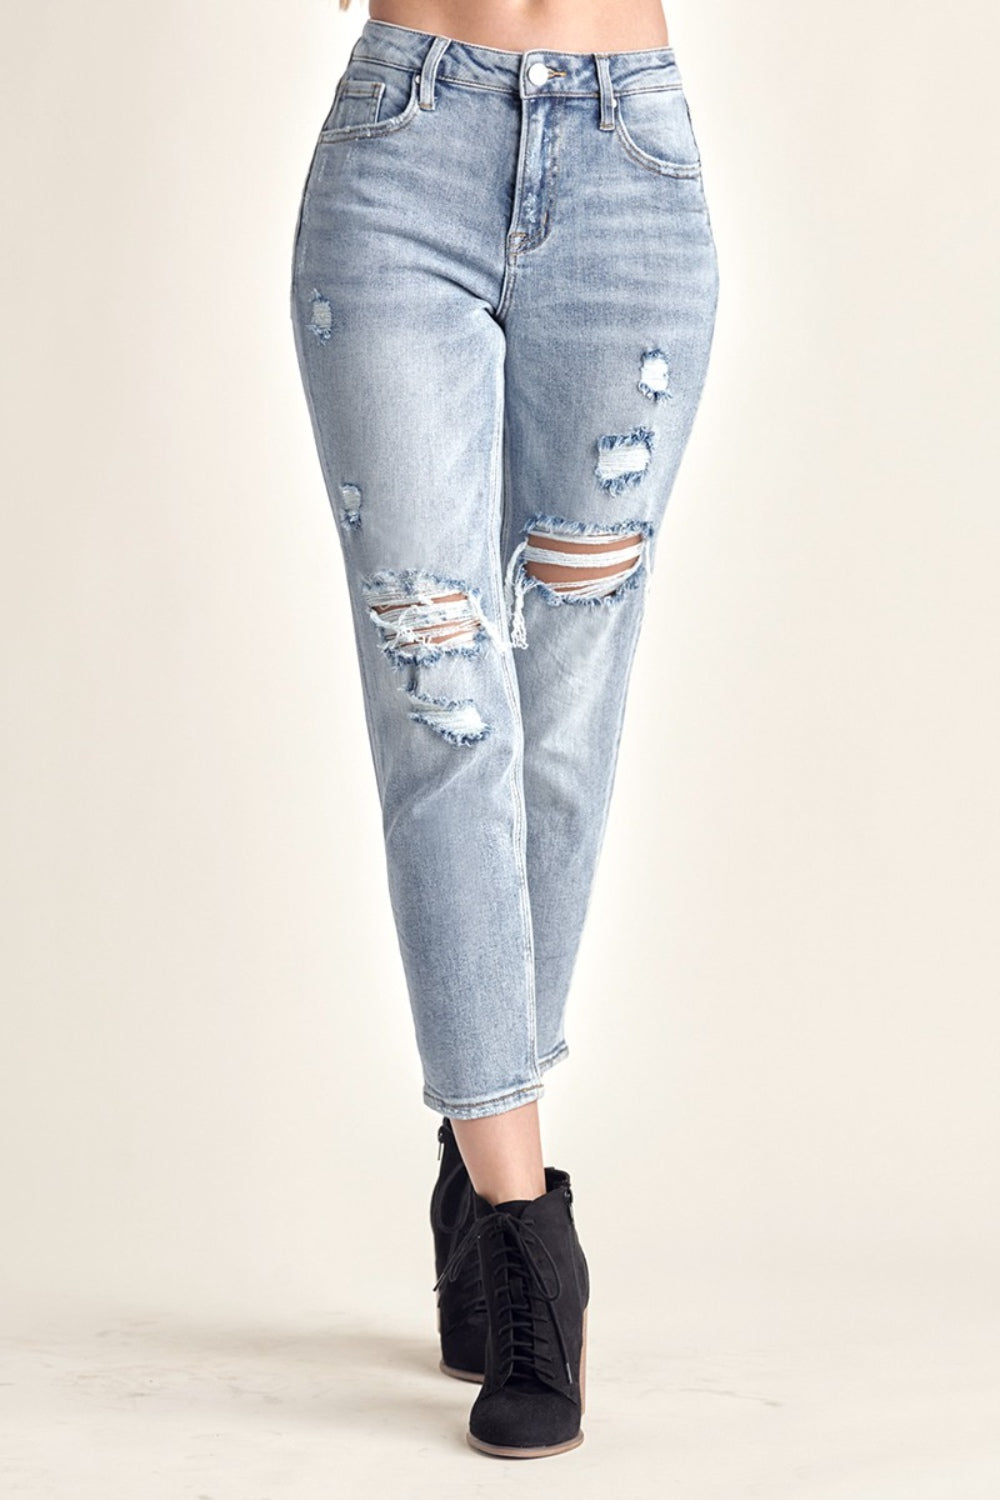 RISEN Distressed Slim Cropped Jeans - Babbazon Cover up